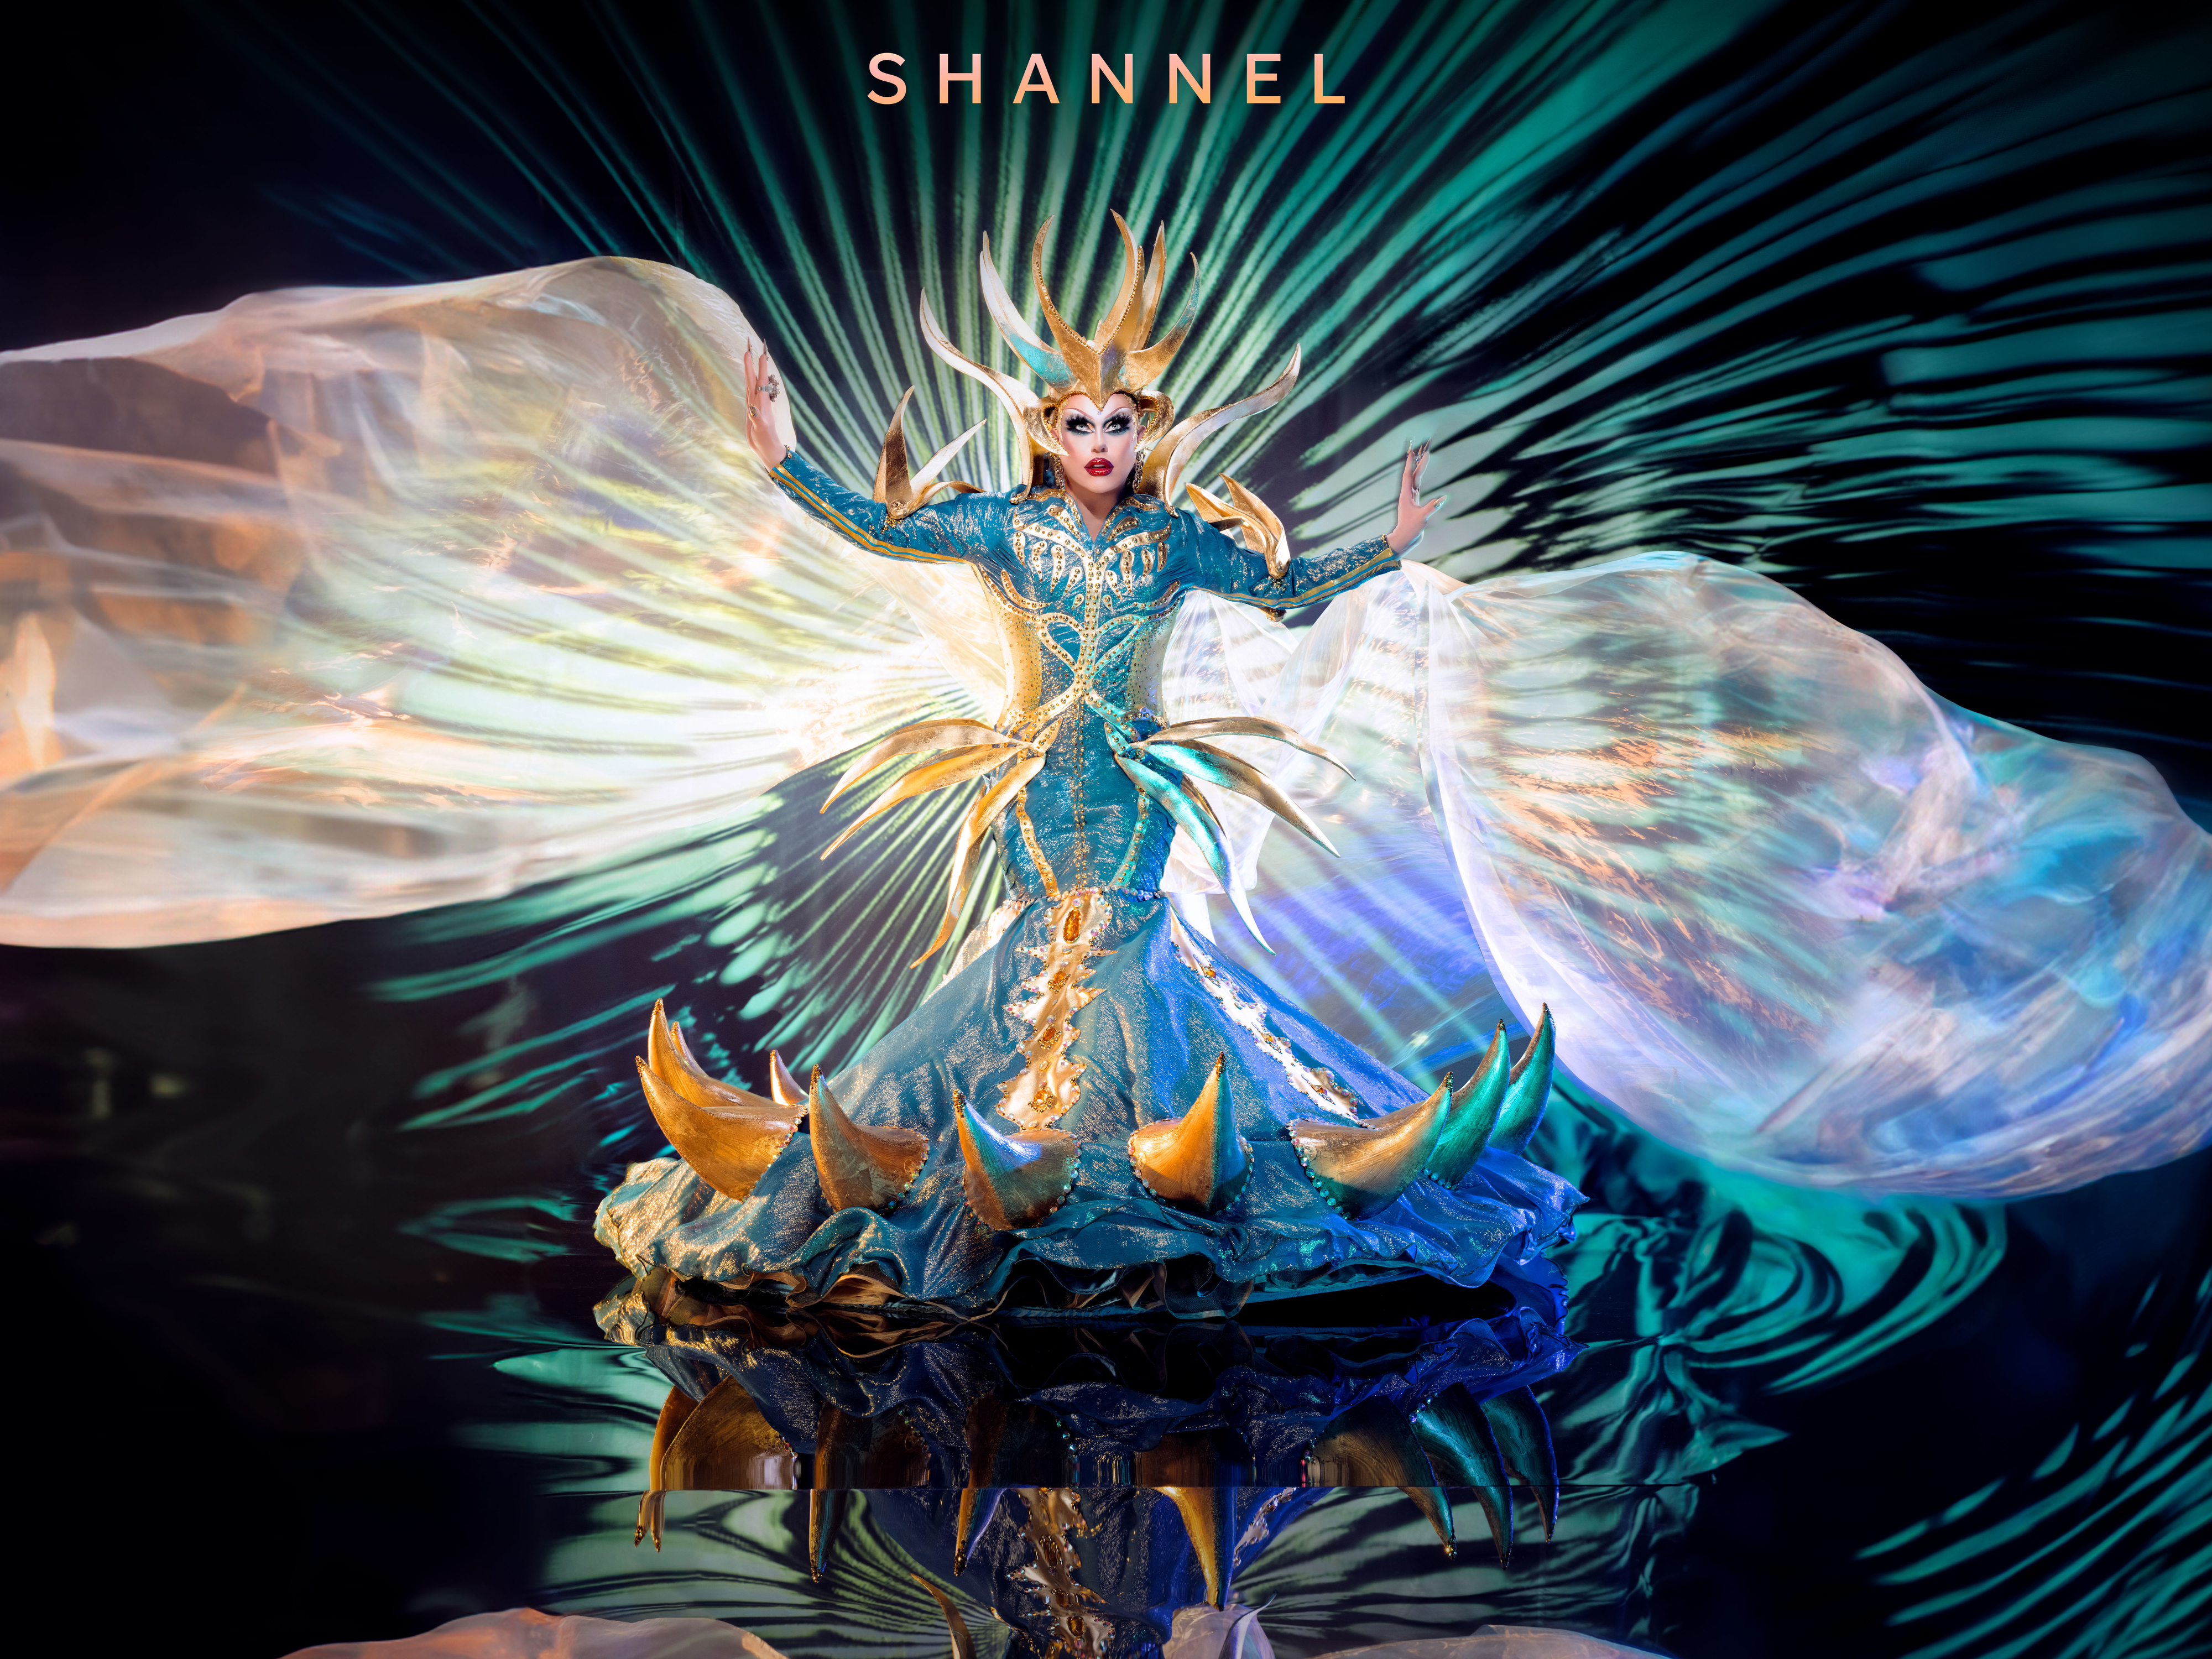 Shannel in an elaborate blue costume with an ornate headpiece